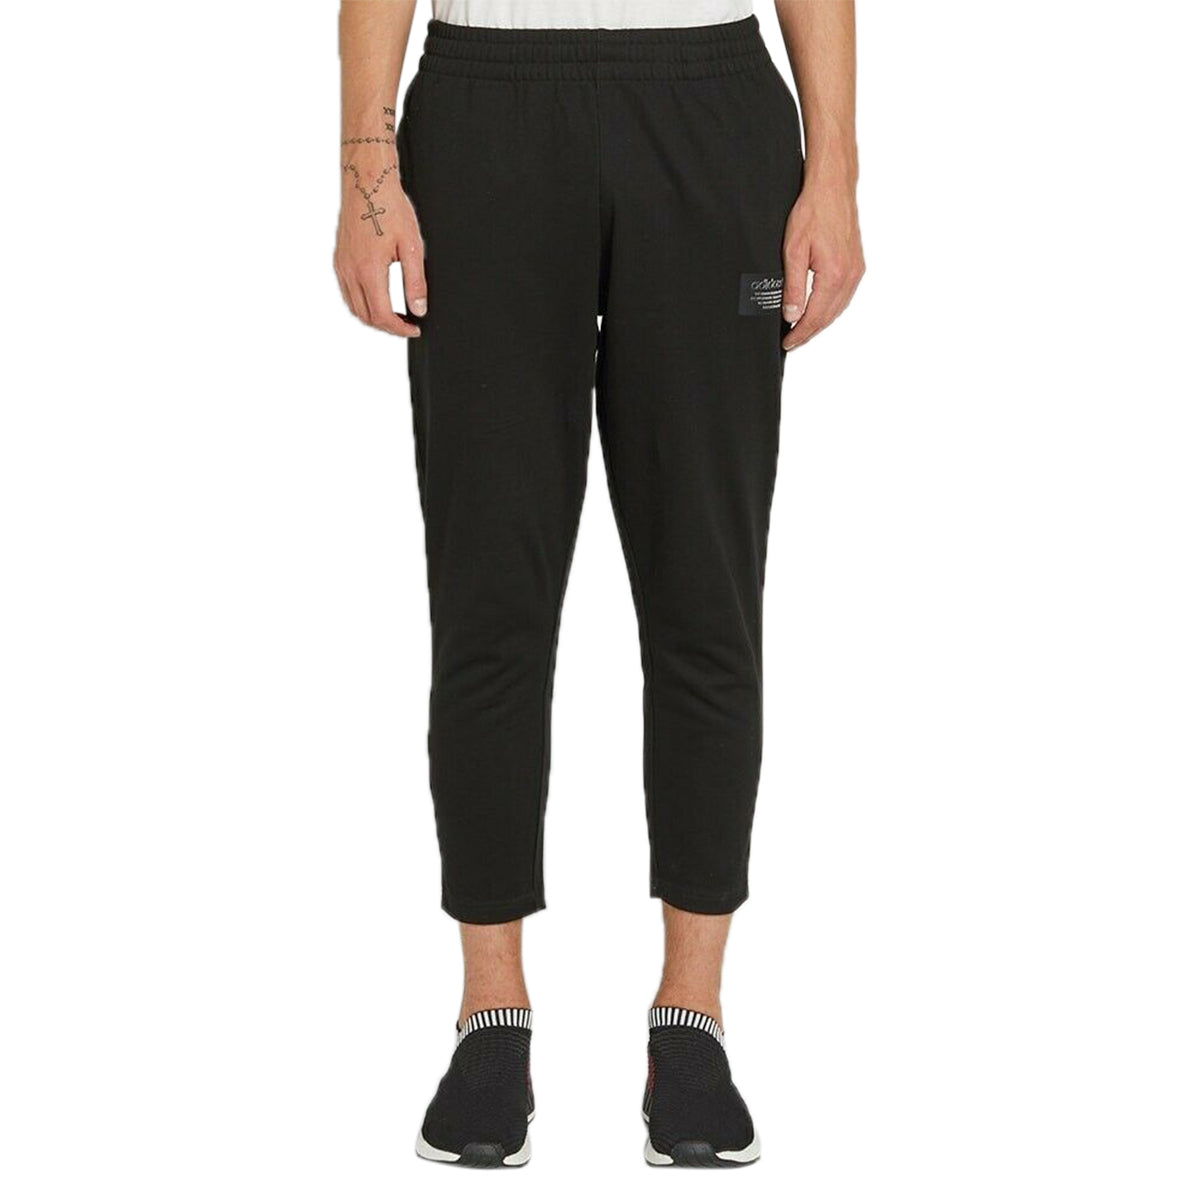 Adidas Nmd_fs Sweatpants Mens Style : Bs2440